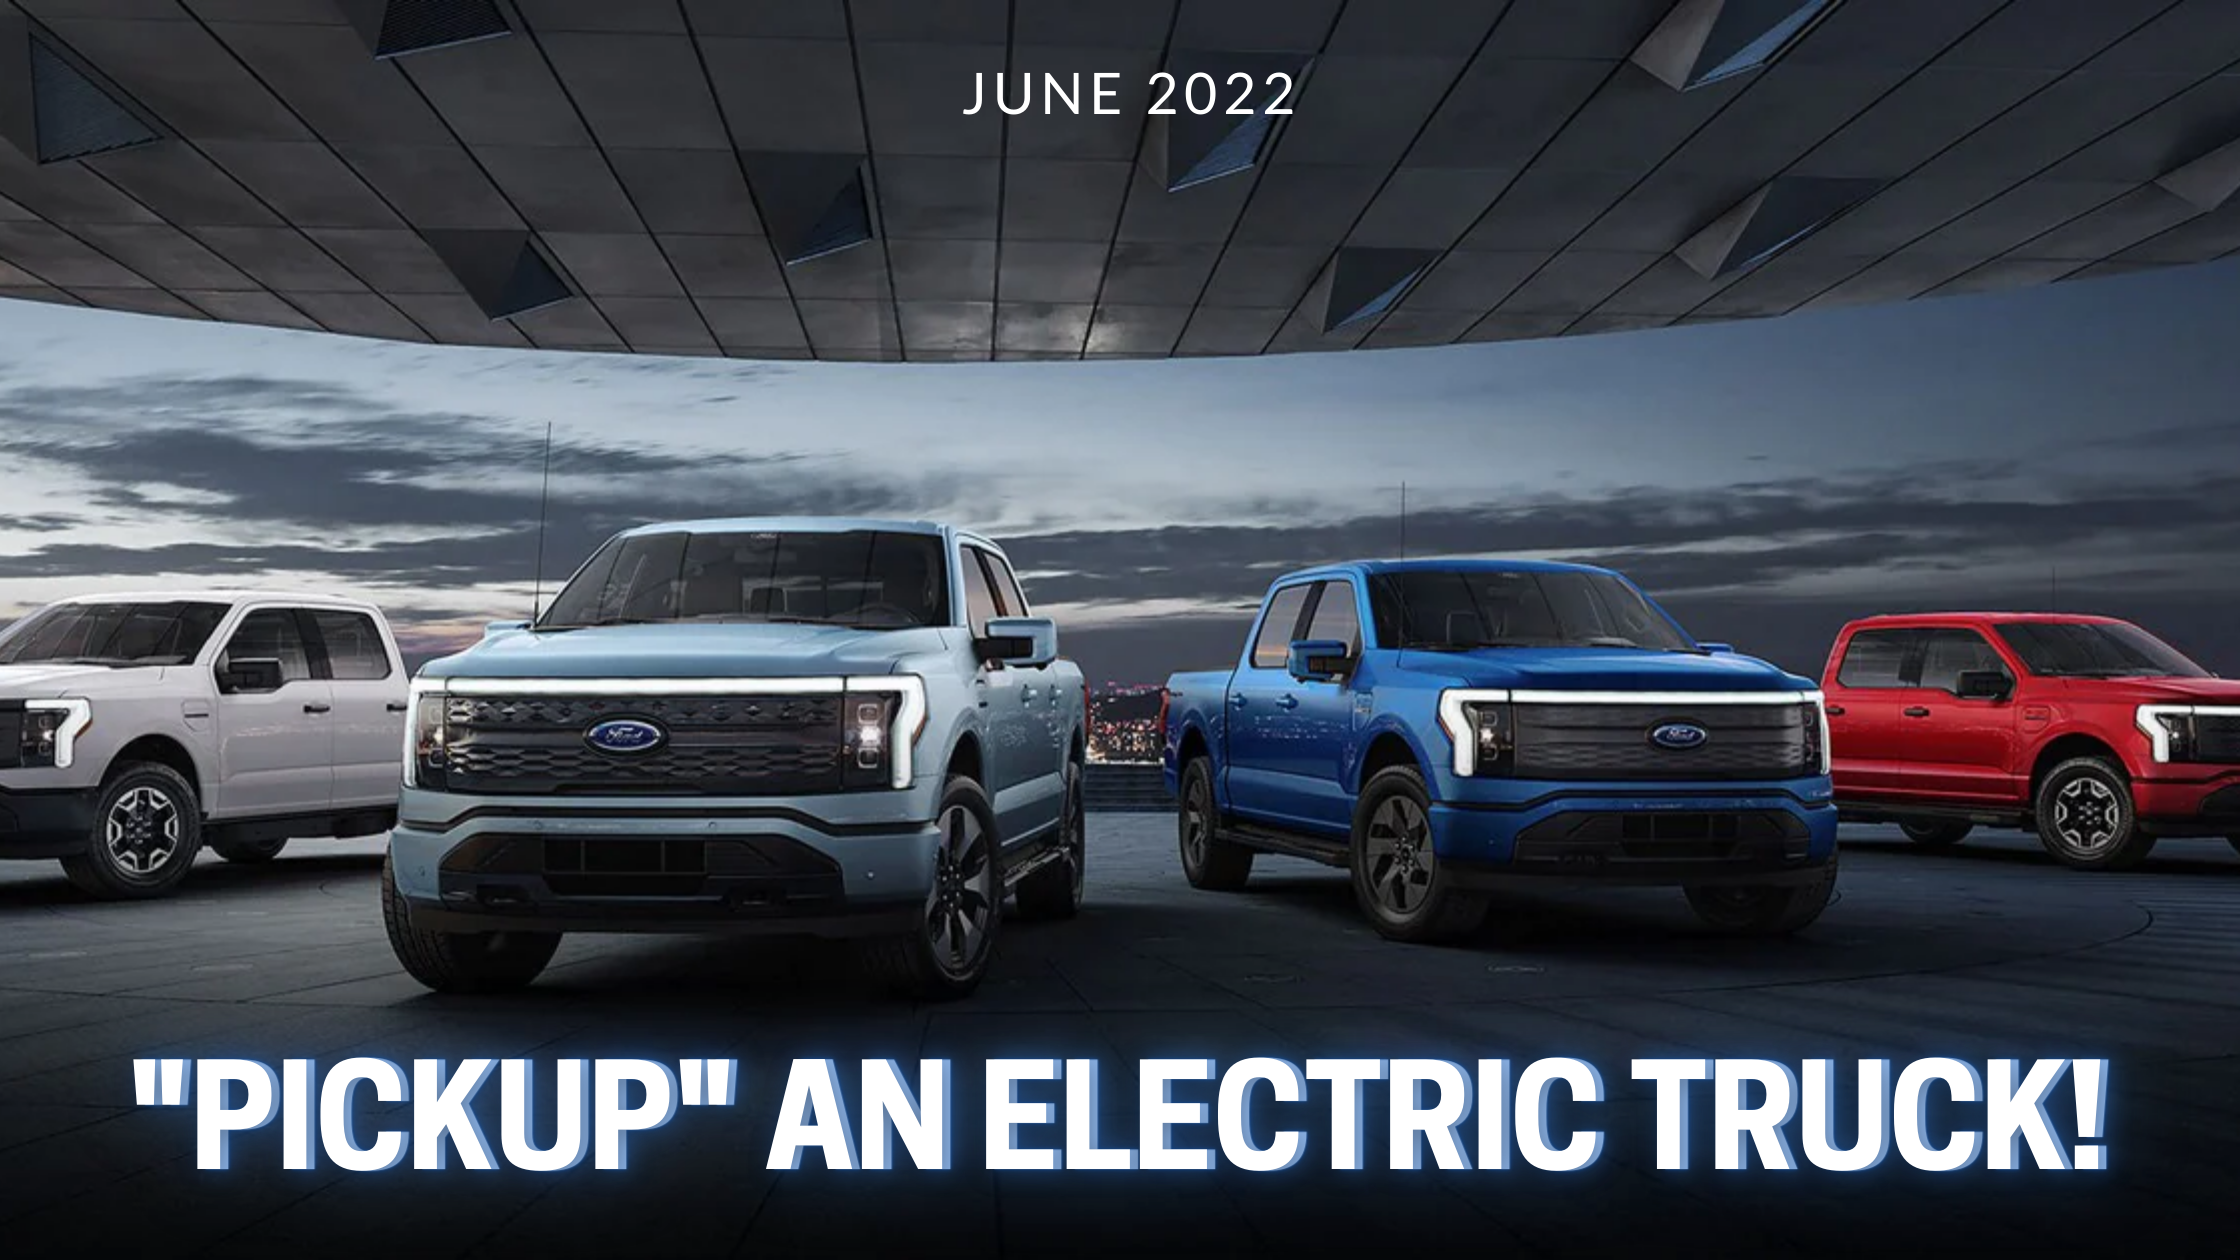 “Pickup” an Electric Truck! – Danvers Drives Electric